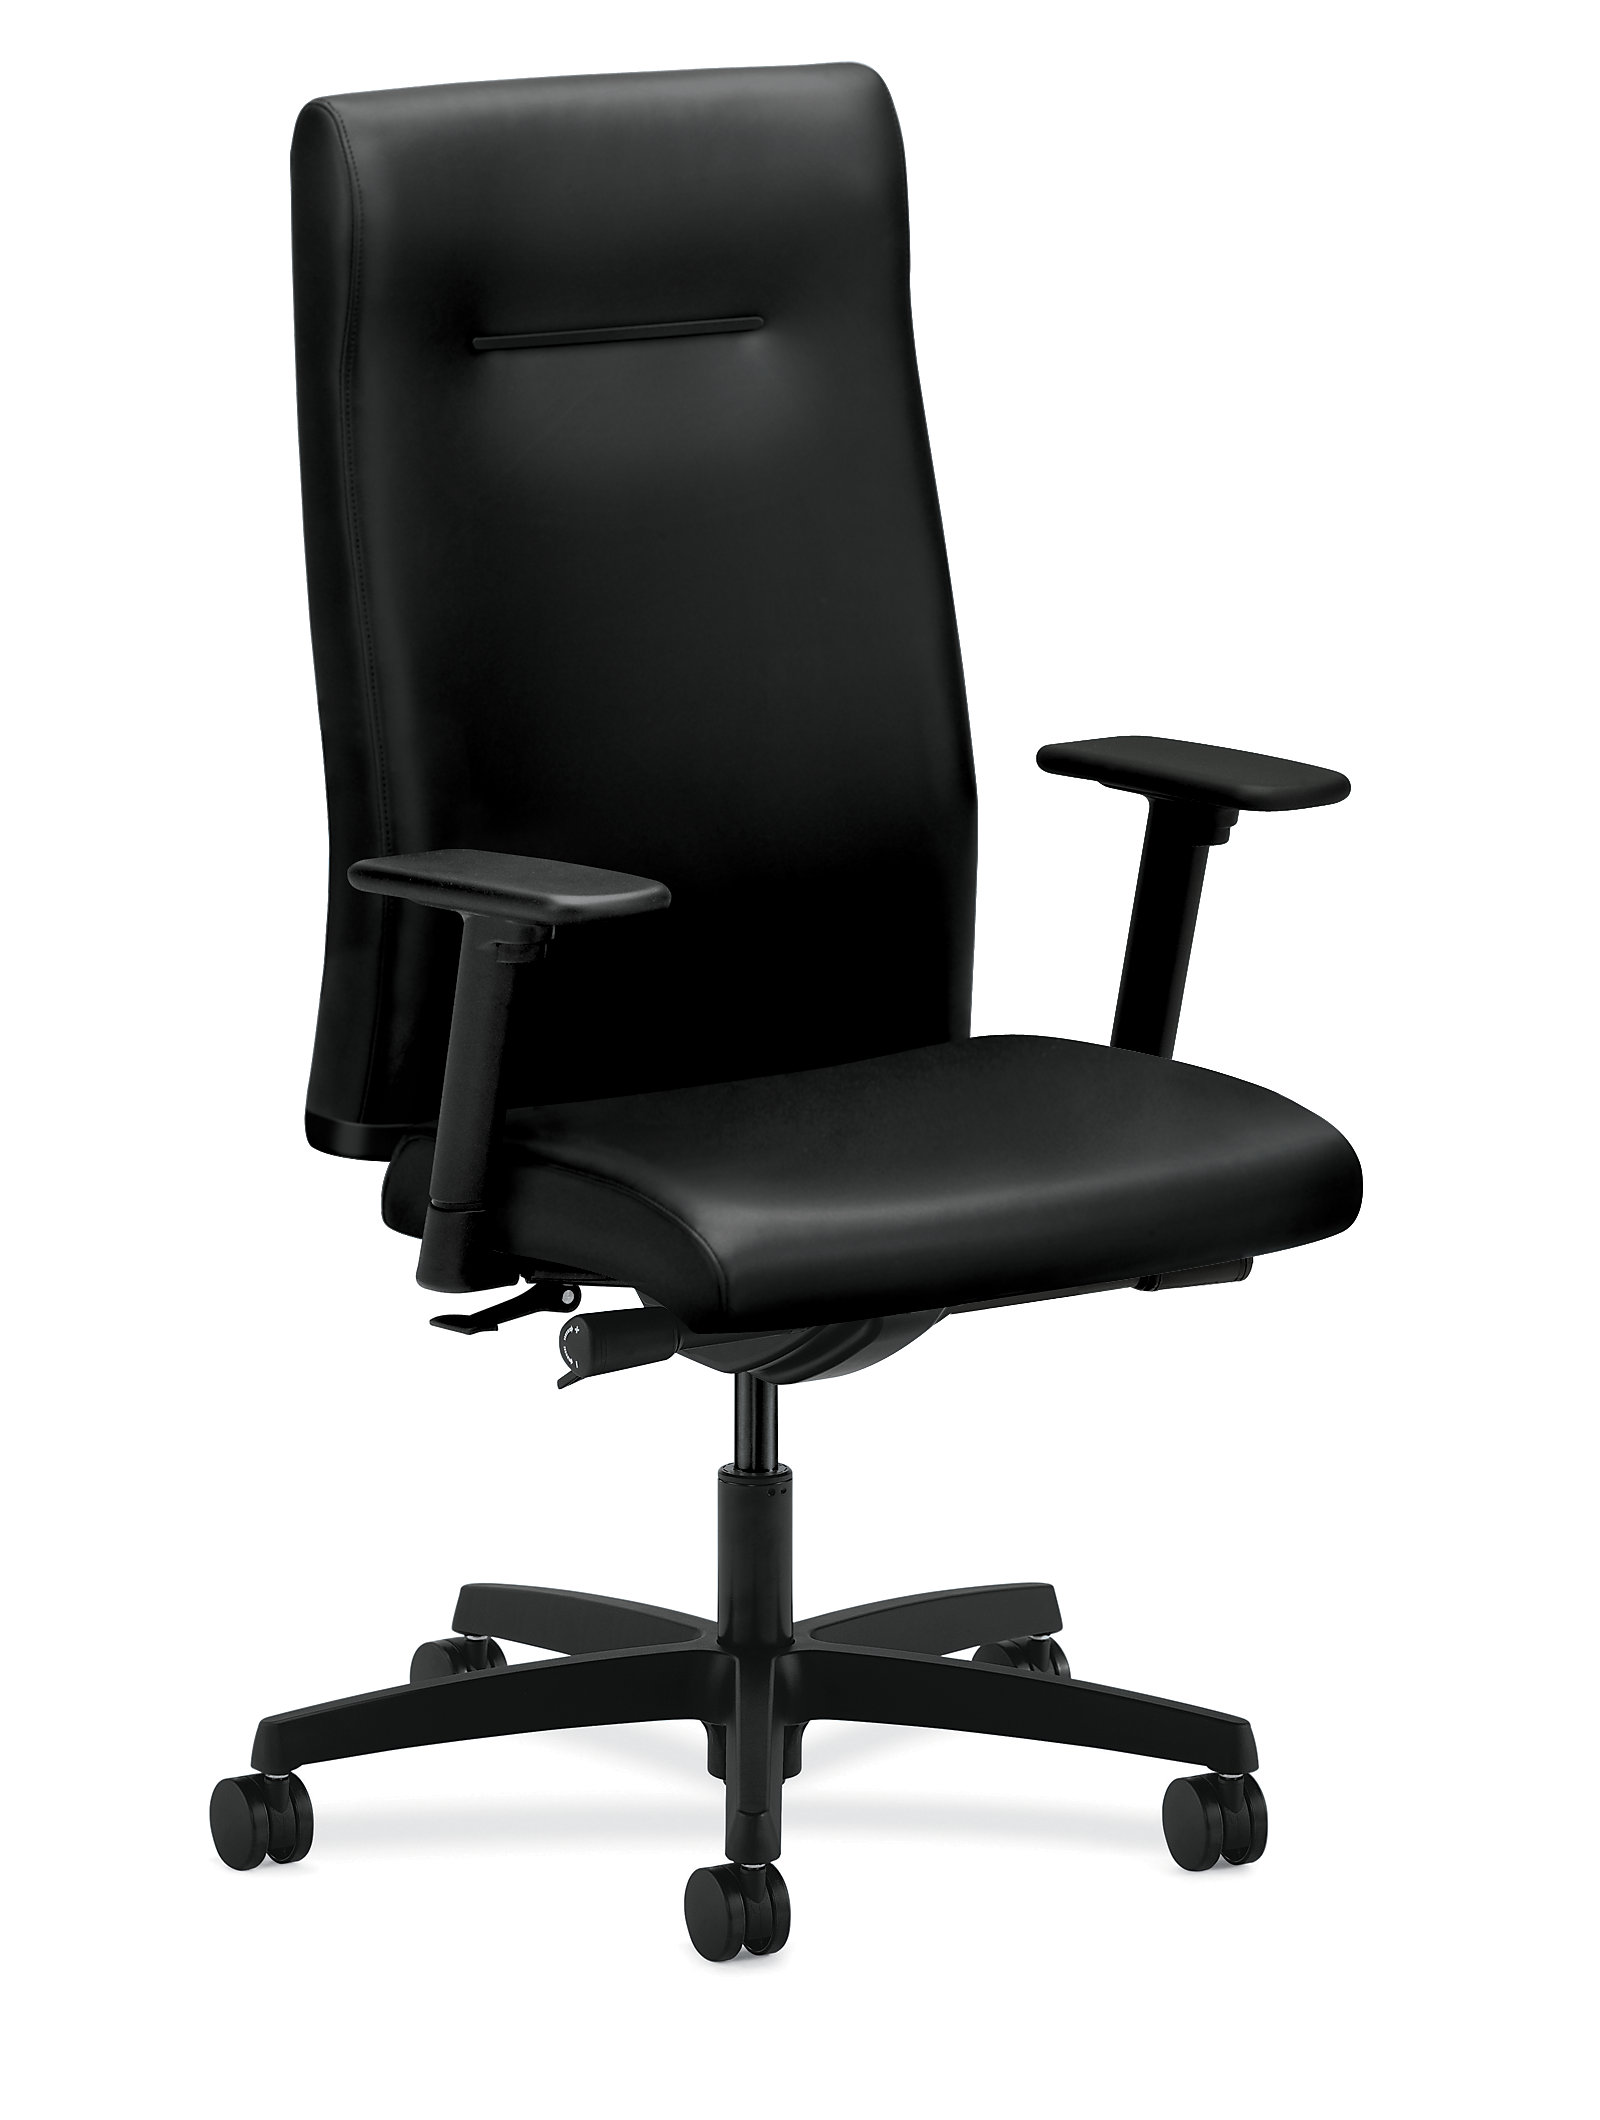 Executive High-Back Chair- HIEH3-image